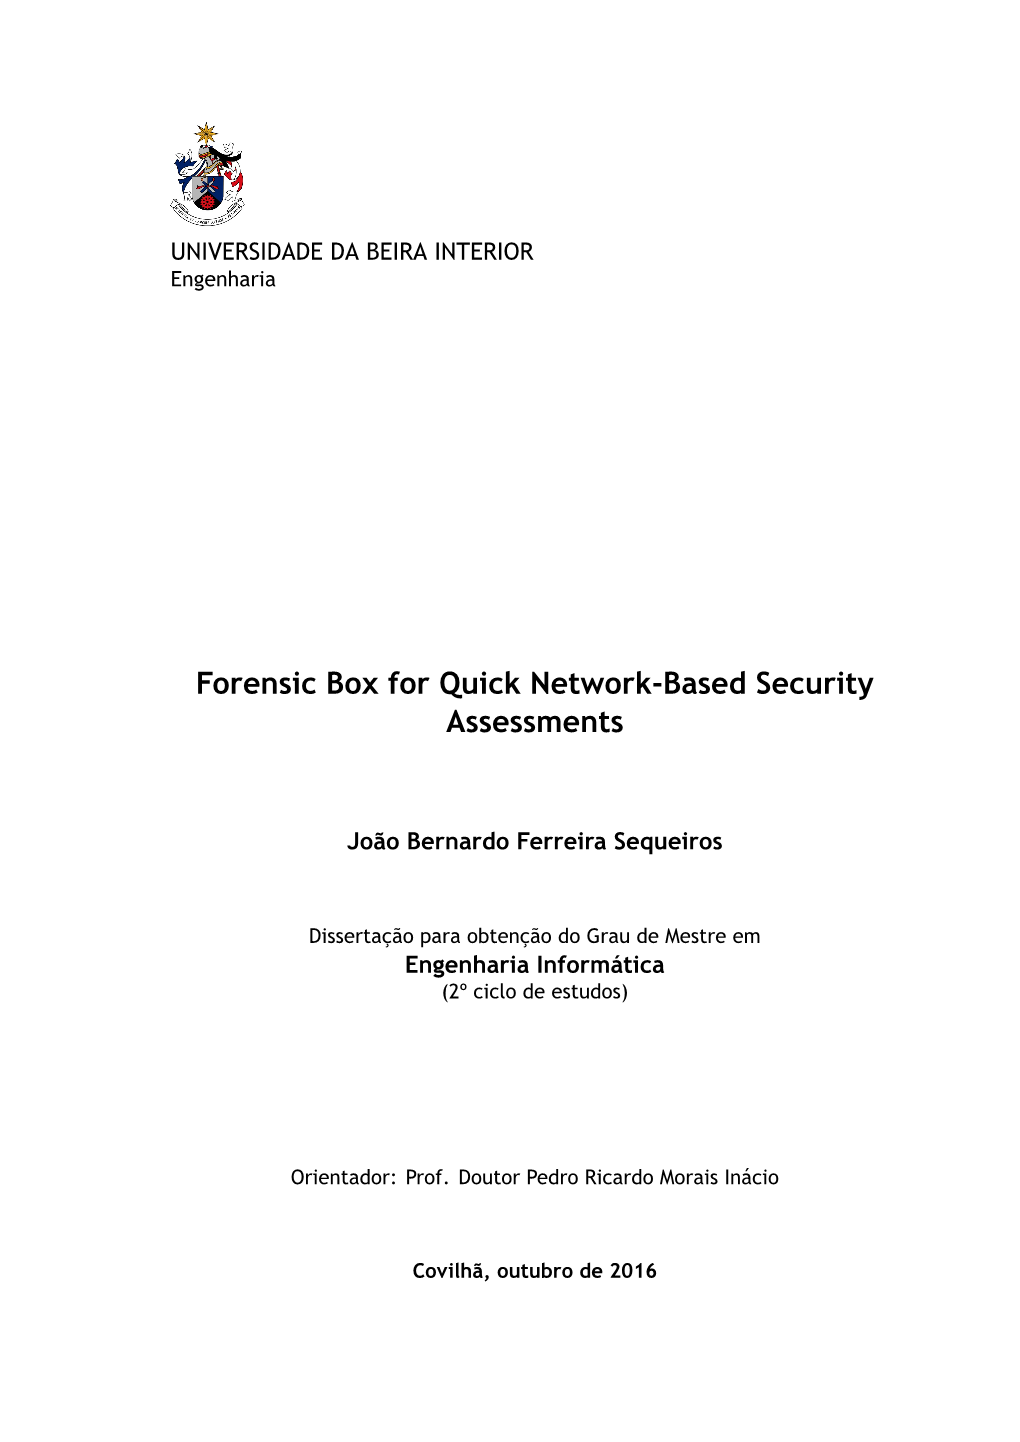 Forensic Box for Quick Network-Based Security Assessments